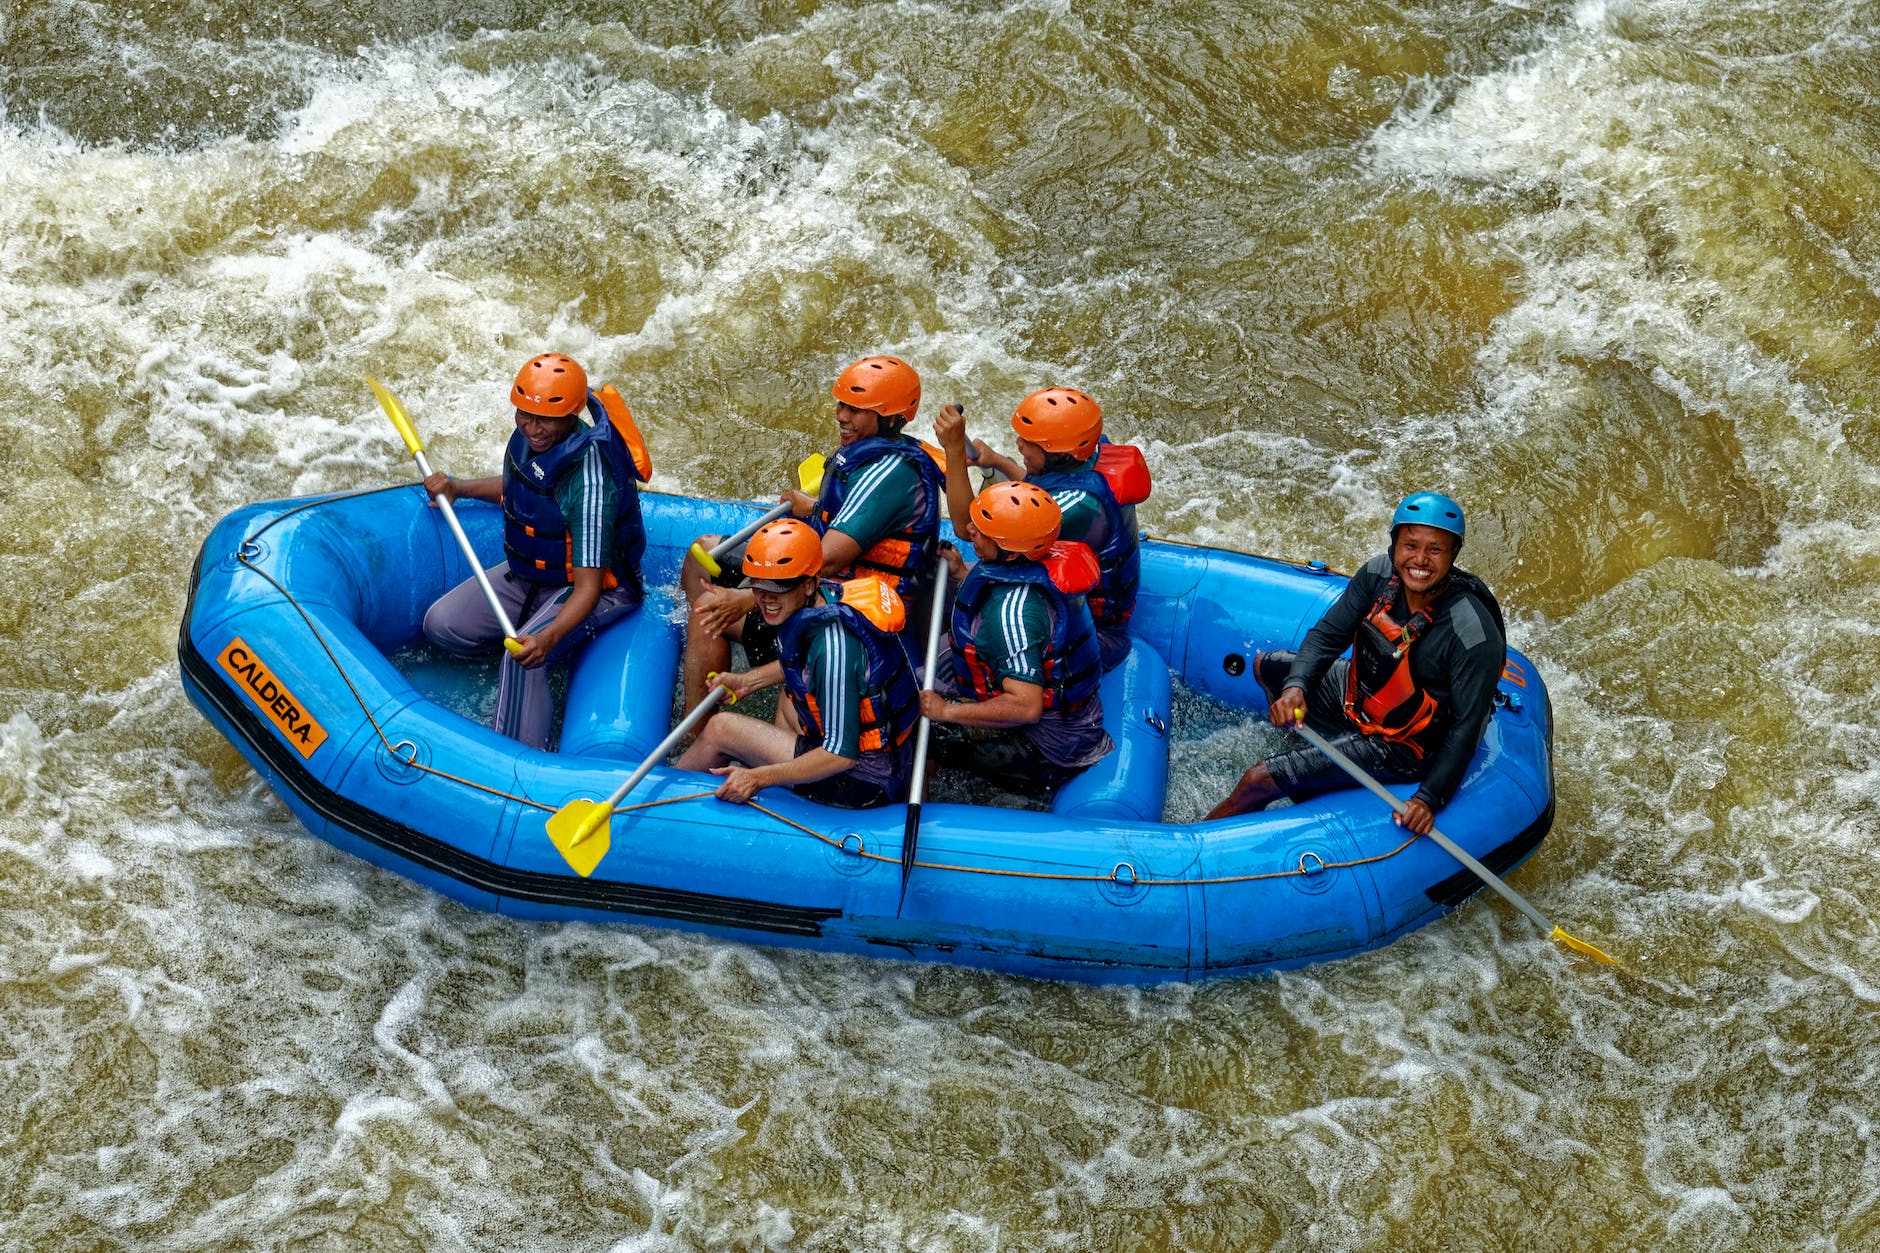 group of people riding blue raft on body of water